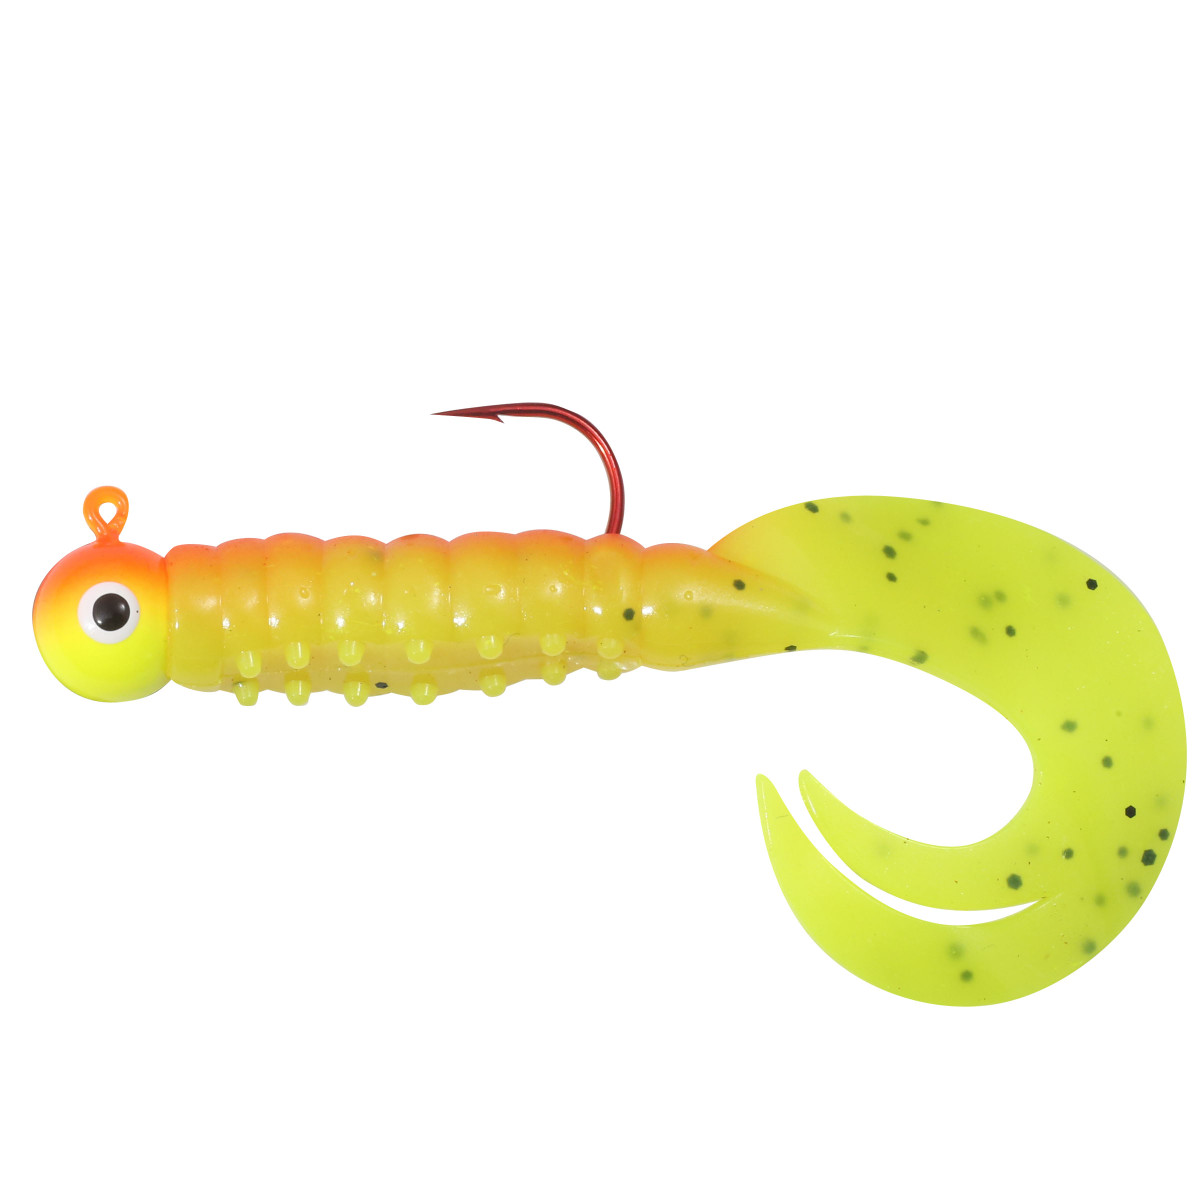 Smiling Mullet Flash Jigs Fishing Lure With Worm-MADE IN USA!